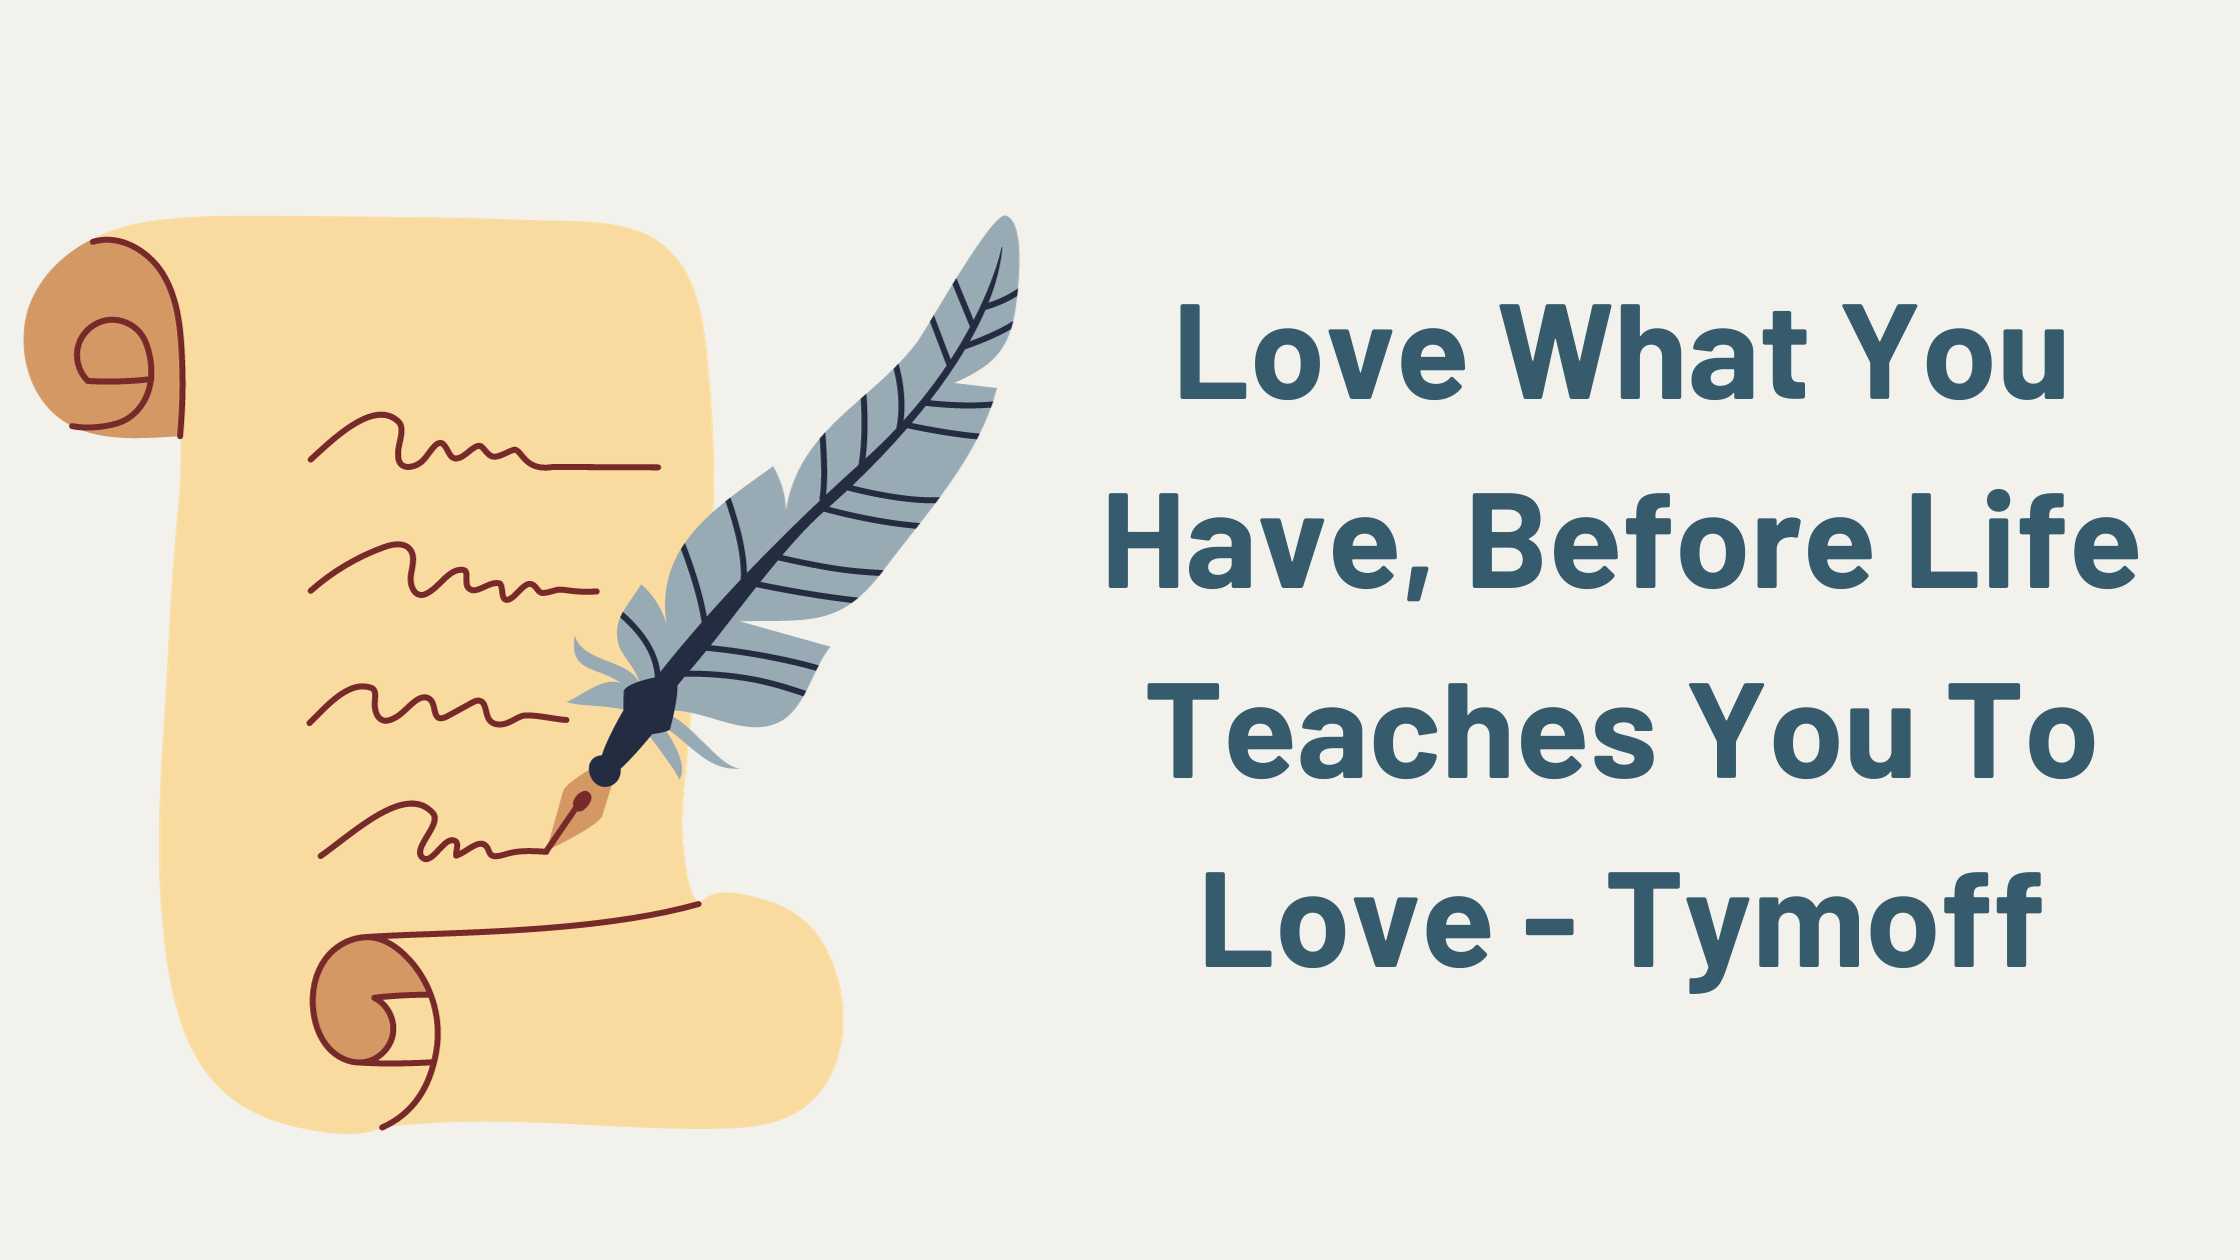 Love What You Have, Before Life Teaches You To Lov – Tymoff